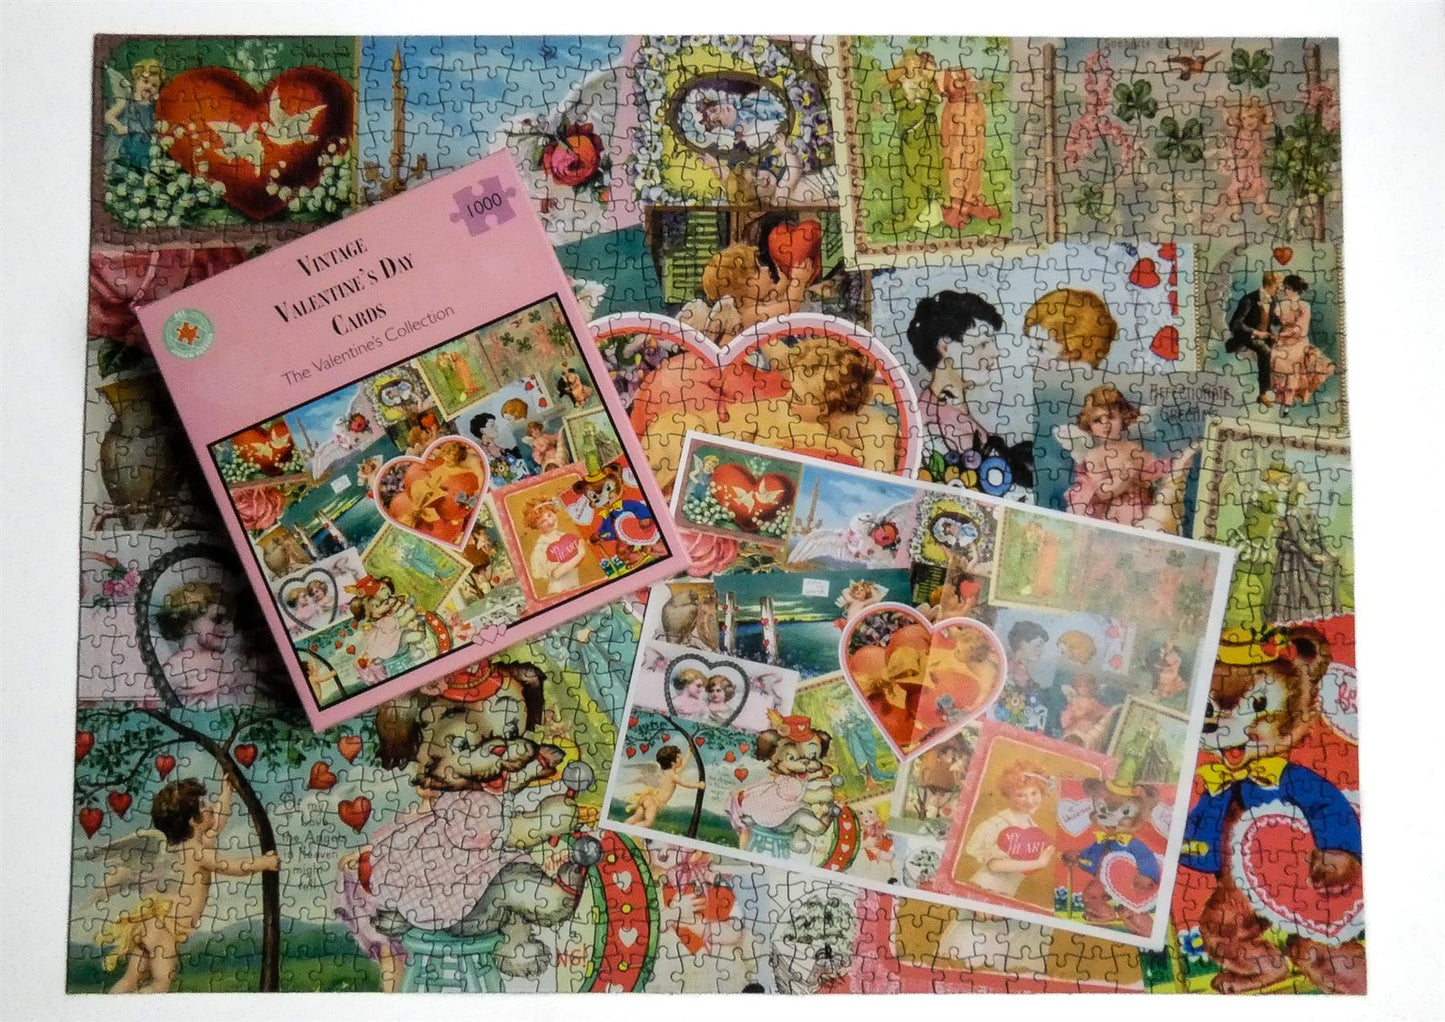 Vintage Valentine's Cards 500 or 1000 Piece Jigsaw Puzzle